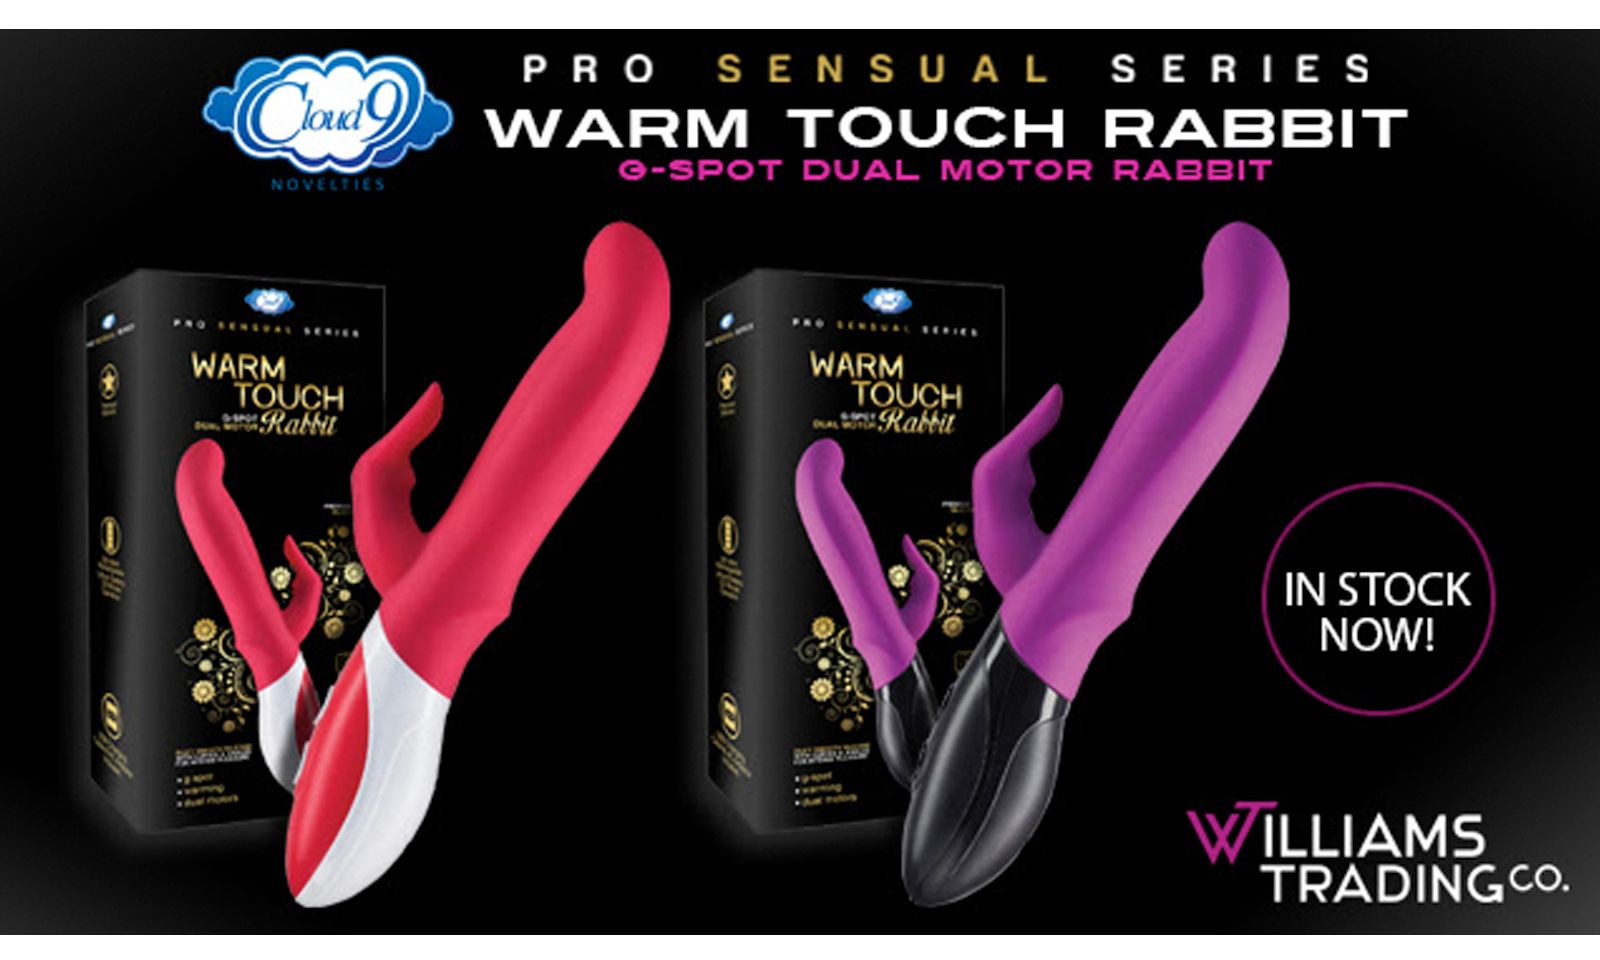 Williams Trading Has Pro Sensual Warming Rabbit From Cloud 9 Novelties In Stock 